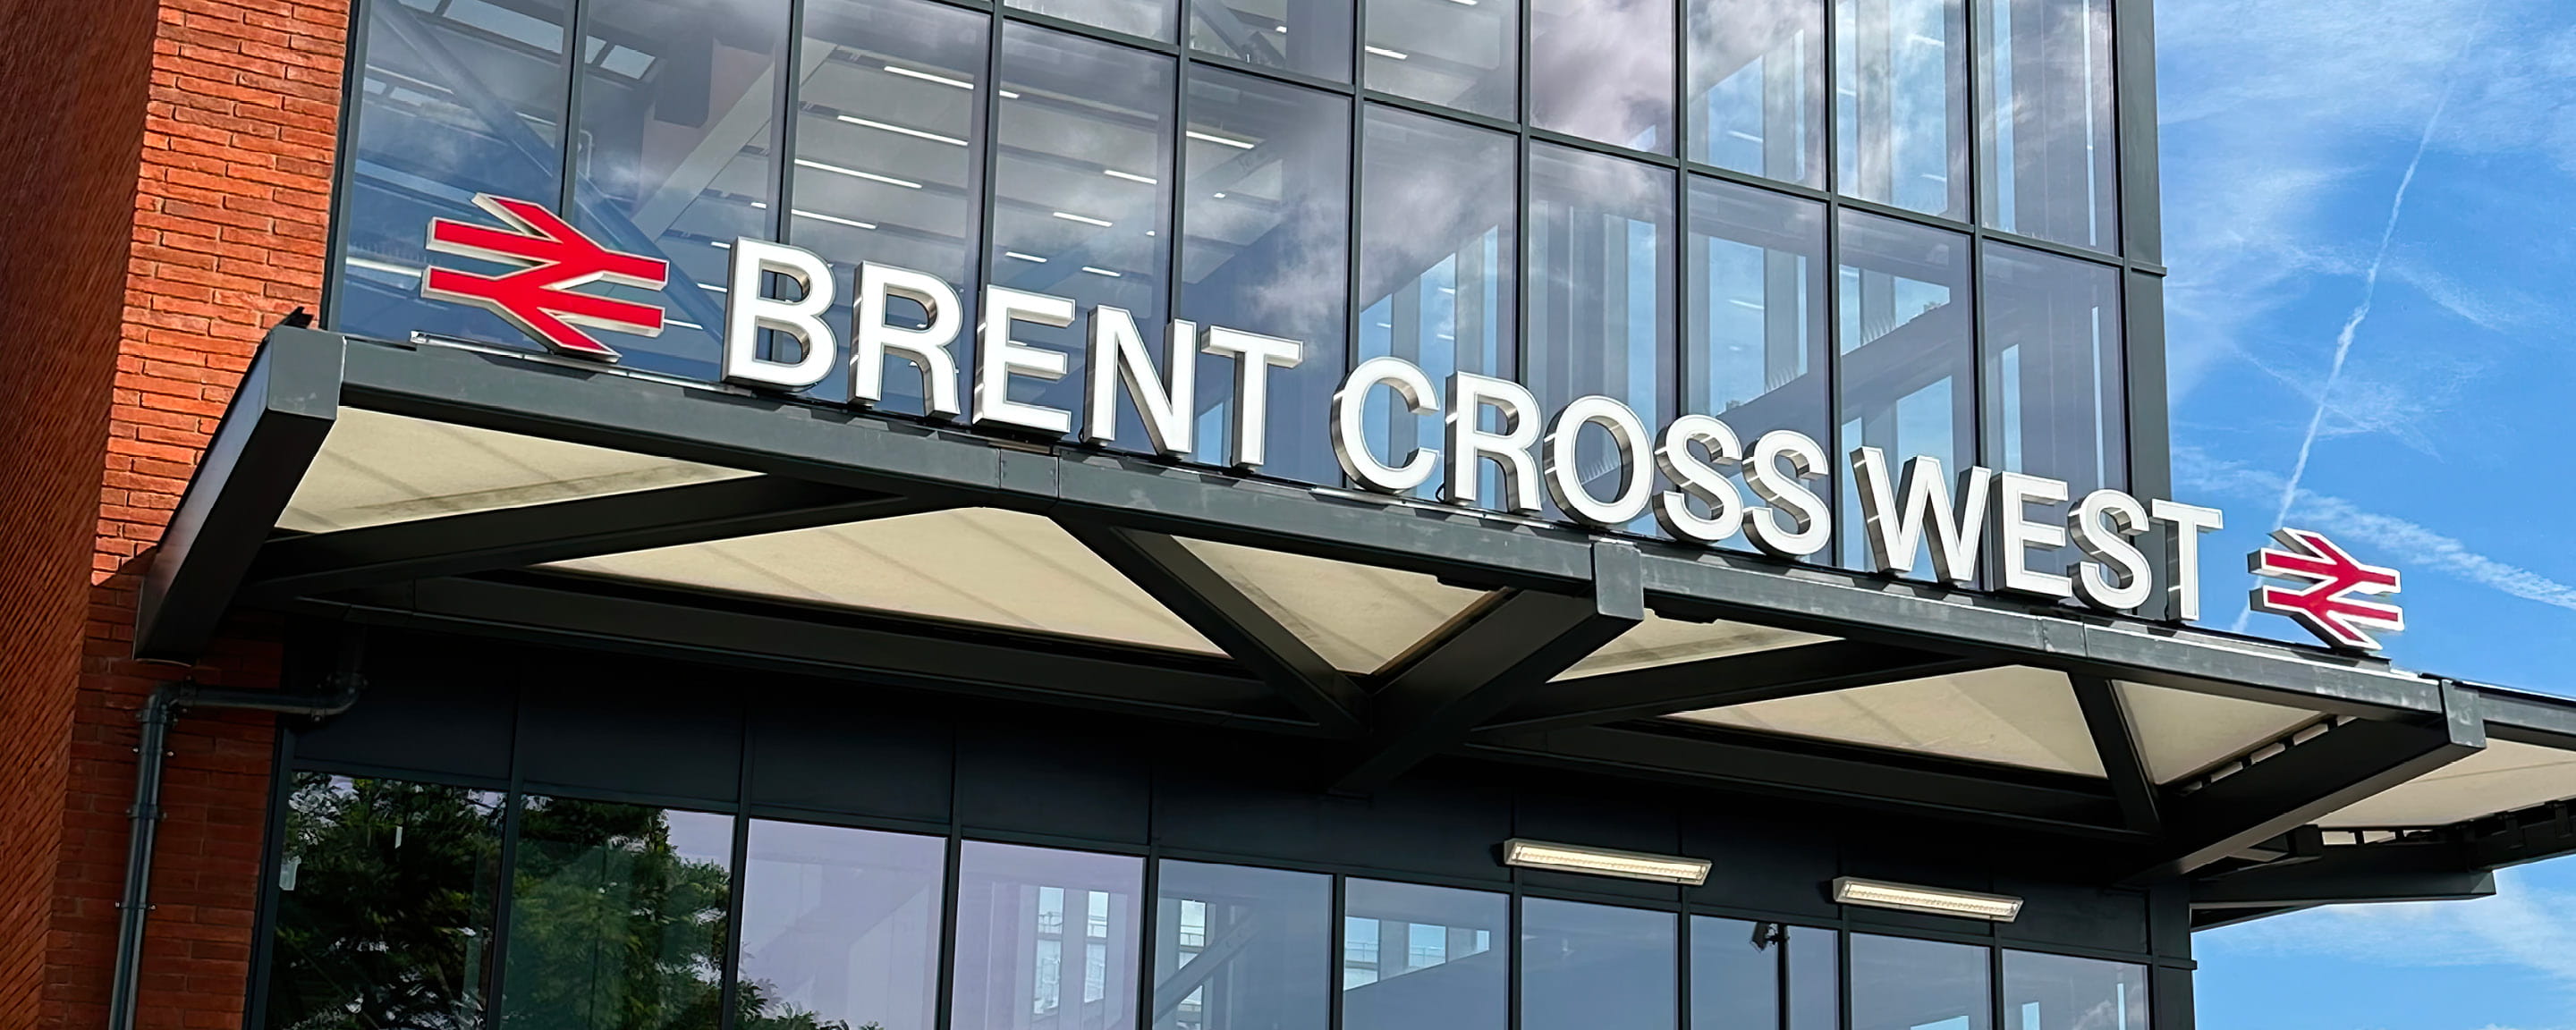 Station sign at Brent Cross West